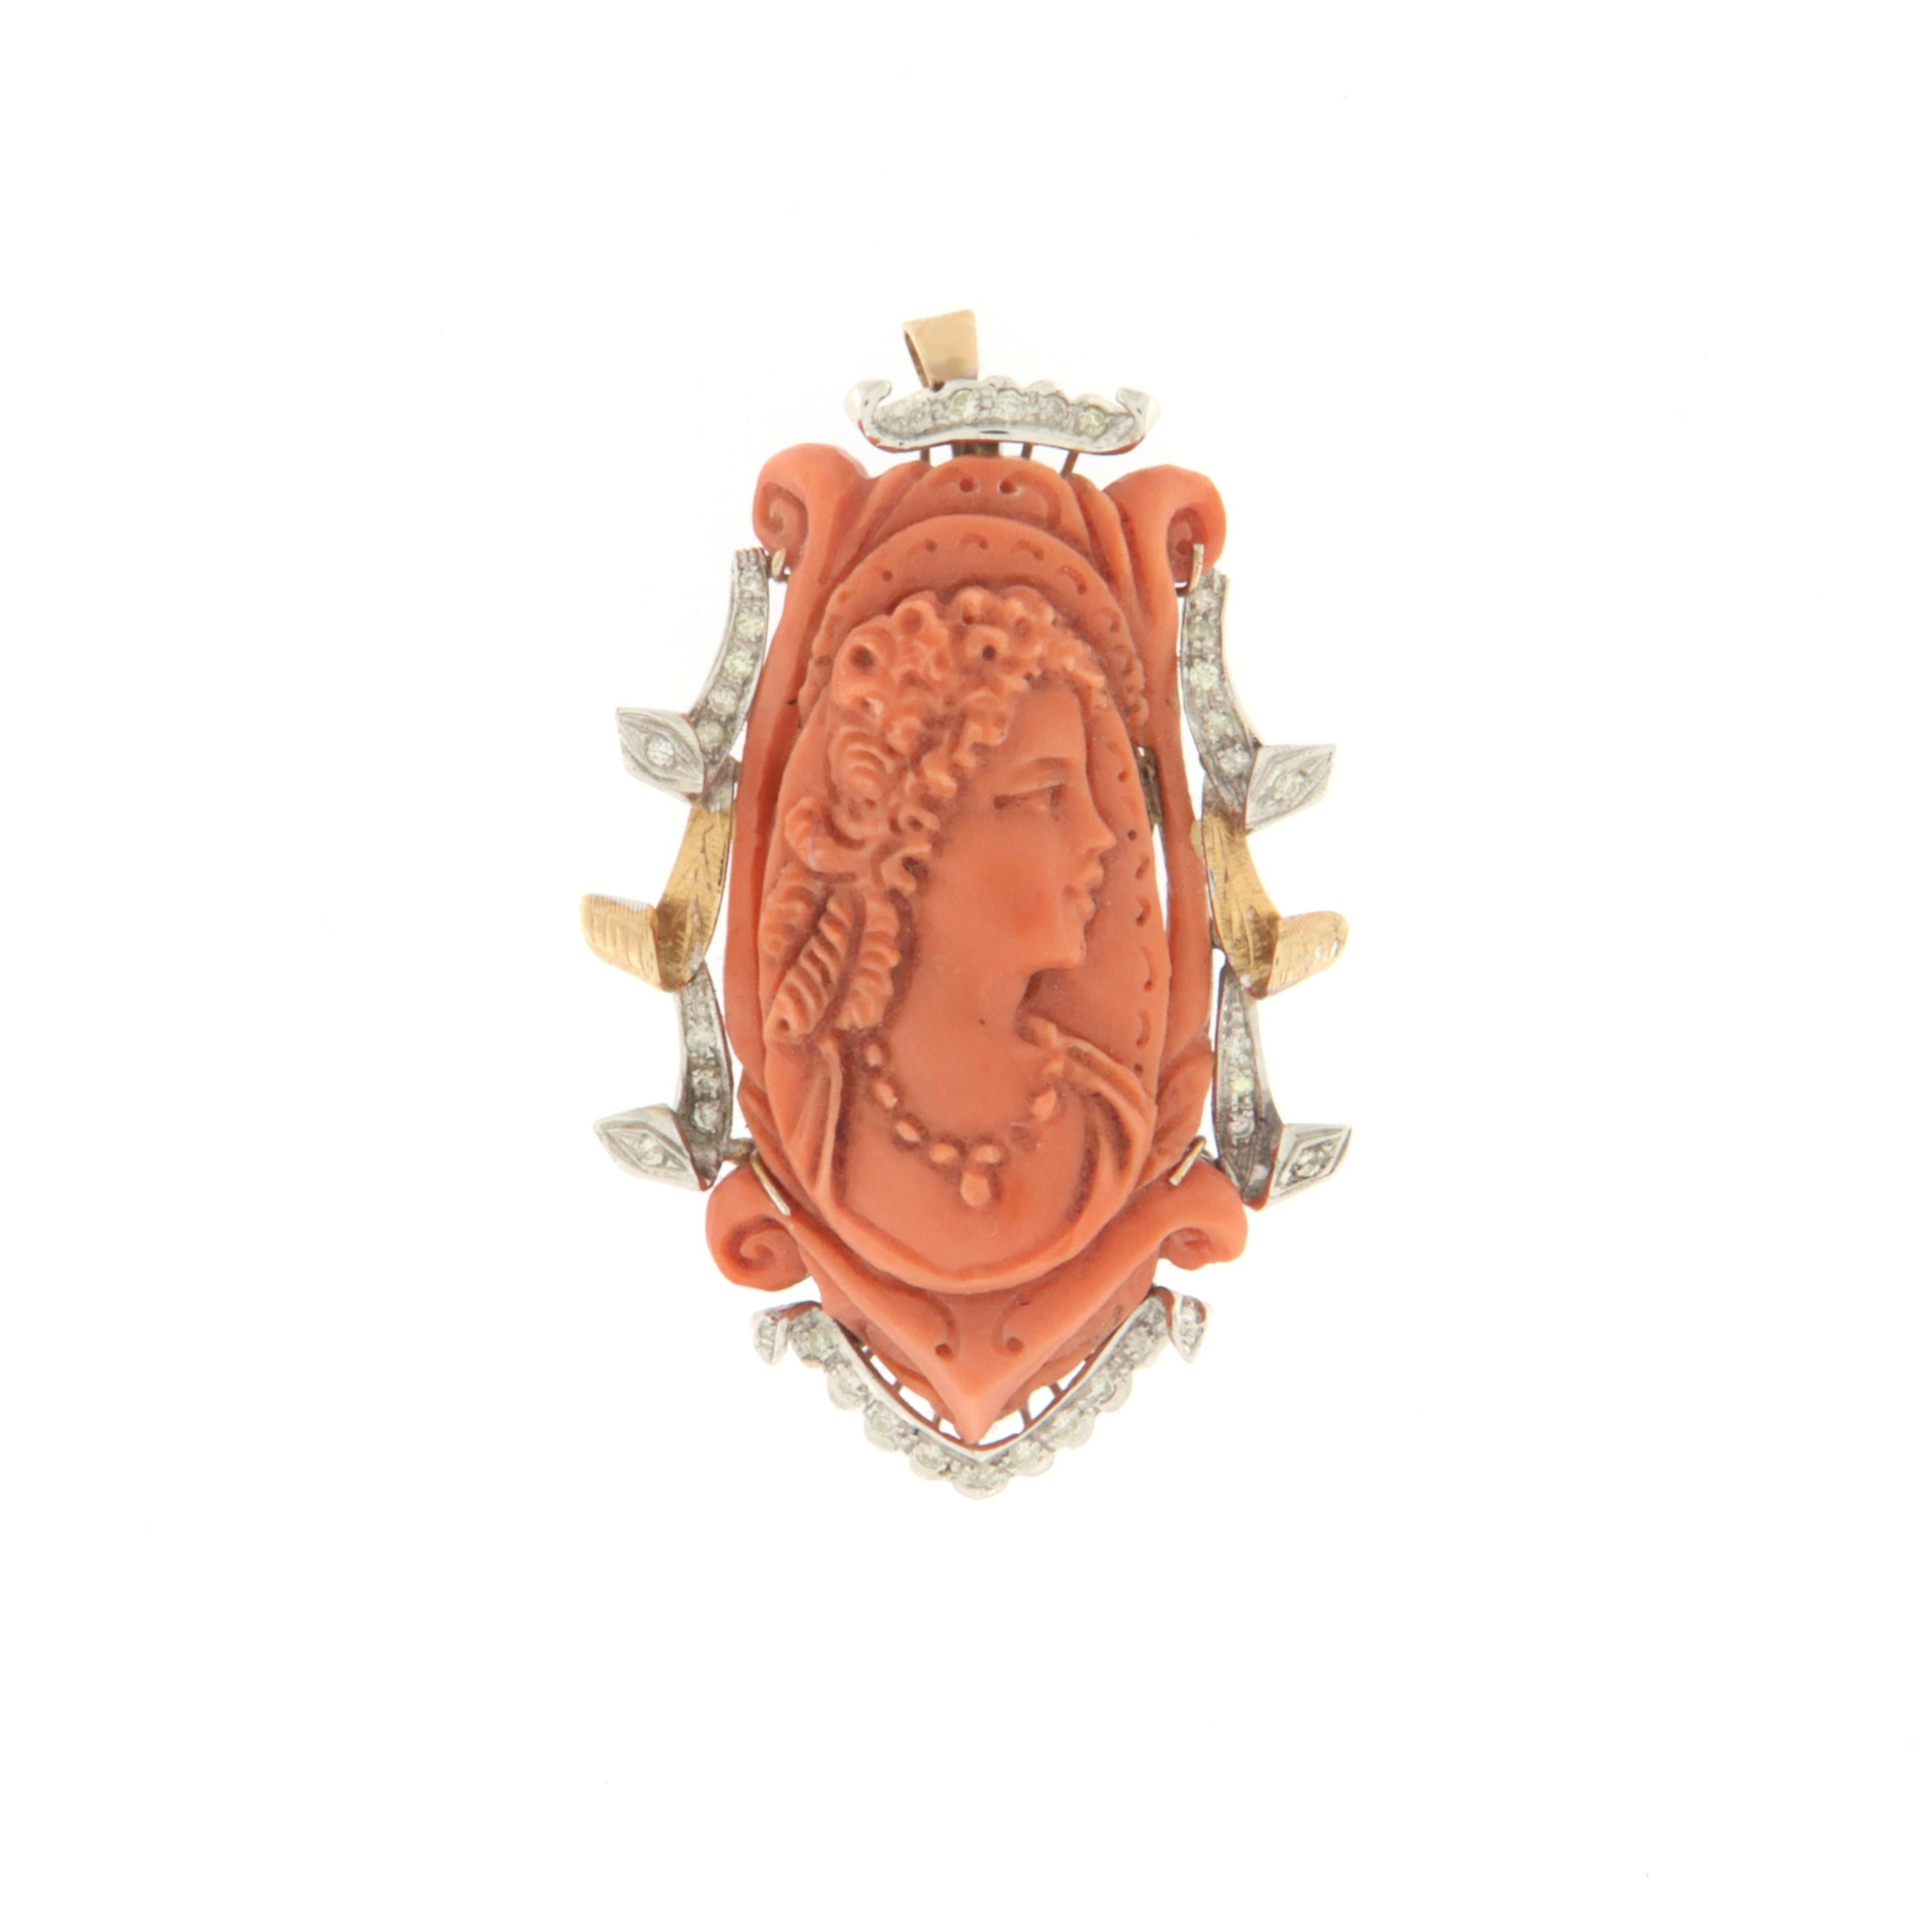 Antique brooch and pendant 14 karat yellow and white gold created entirely by hand with diamonds and in the center a beautiful engraved coral depicting a woman face.

Brooch total weight 35.30 grams
Diamonds weight 0.70 karat
(the price is without